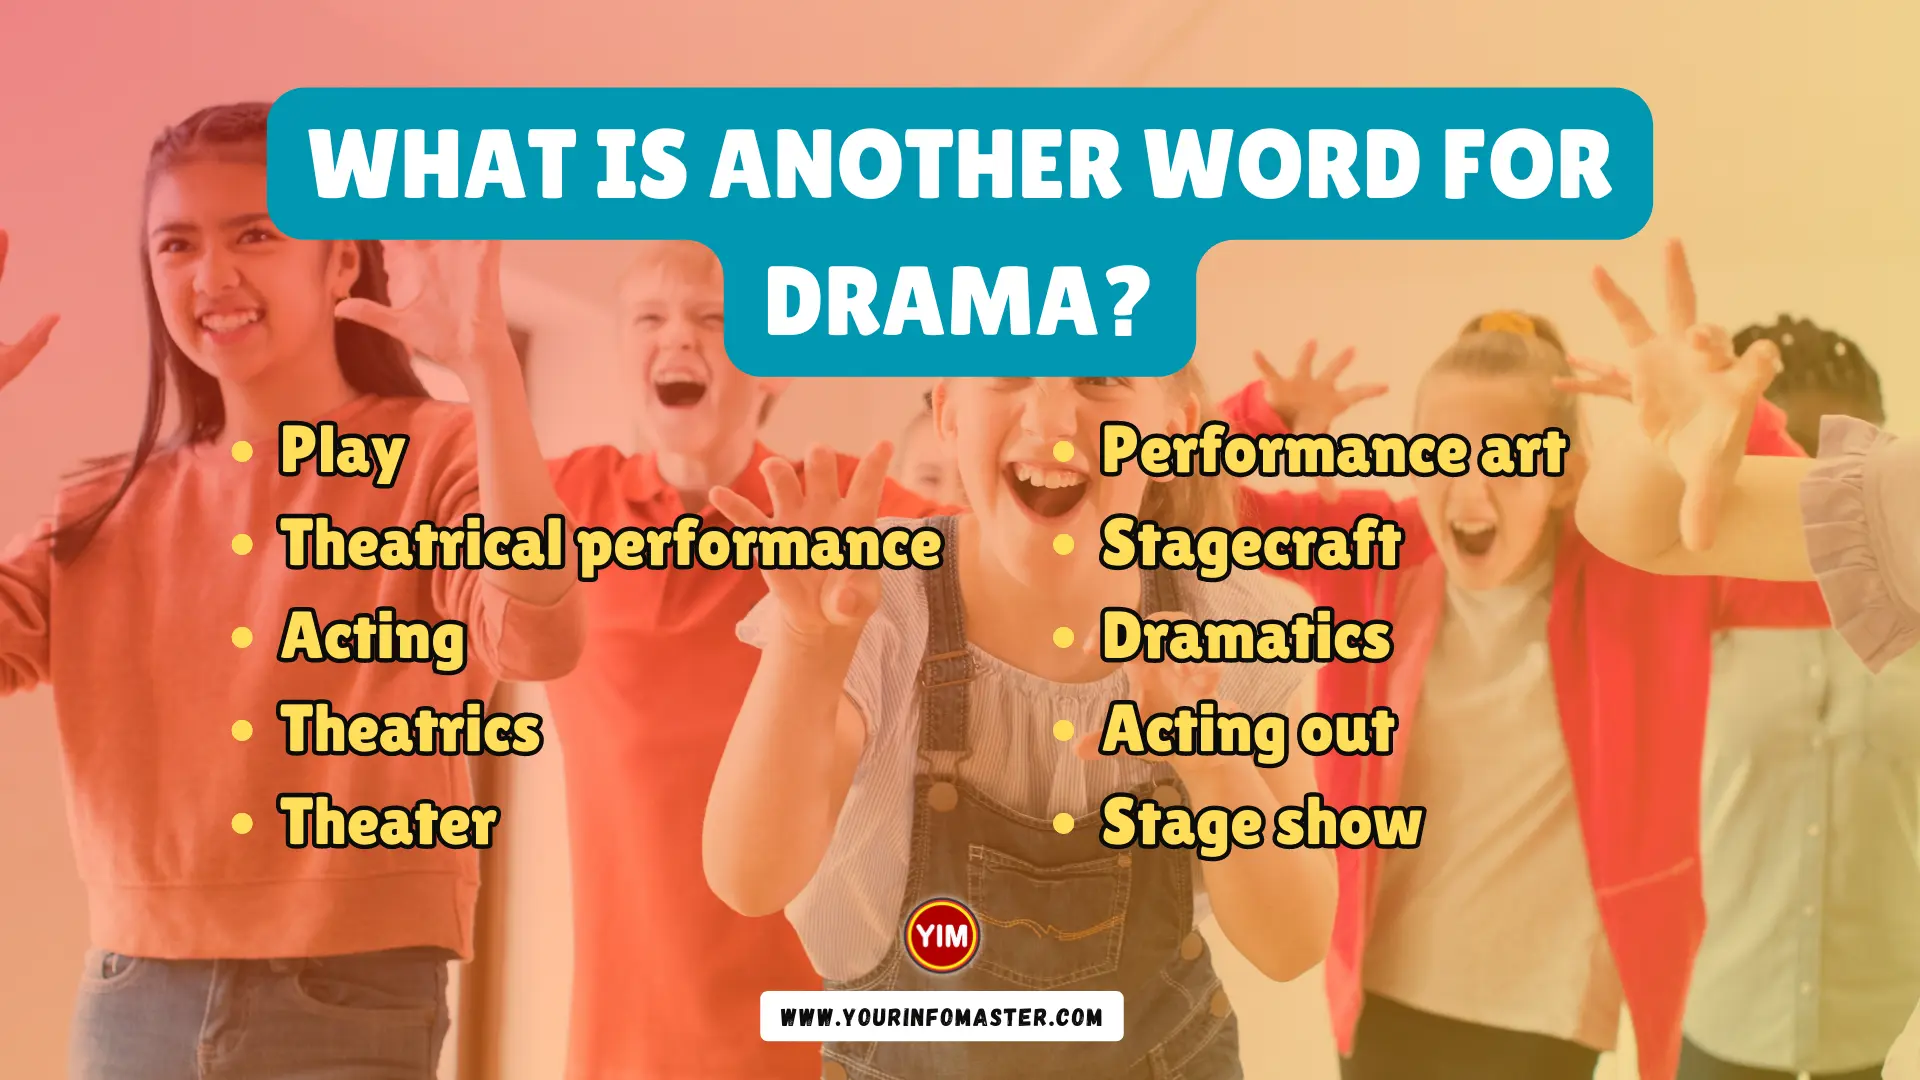 What is another word for Drama